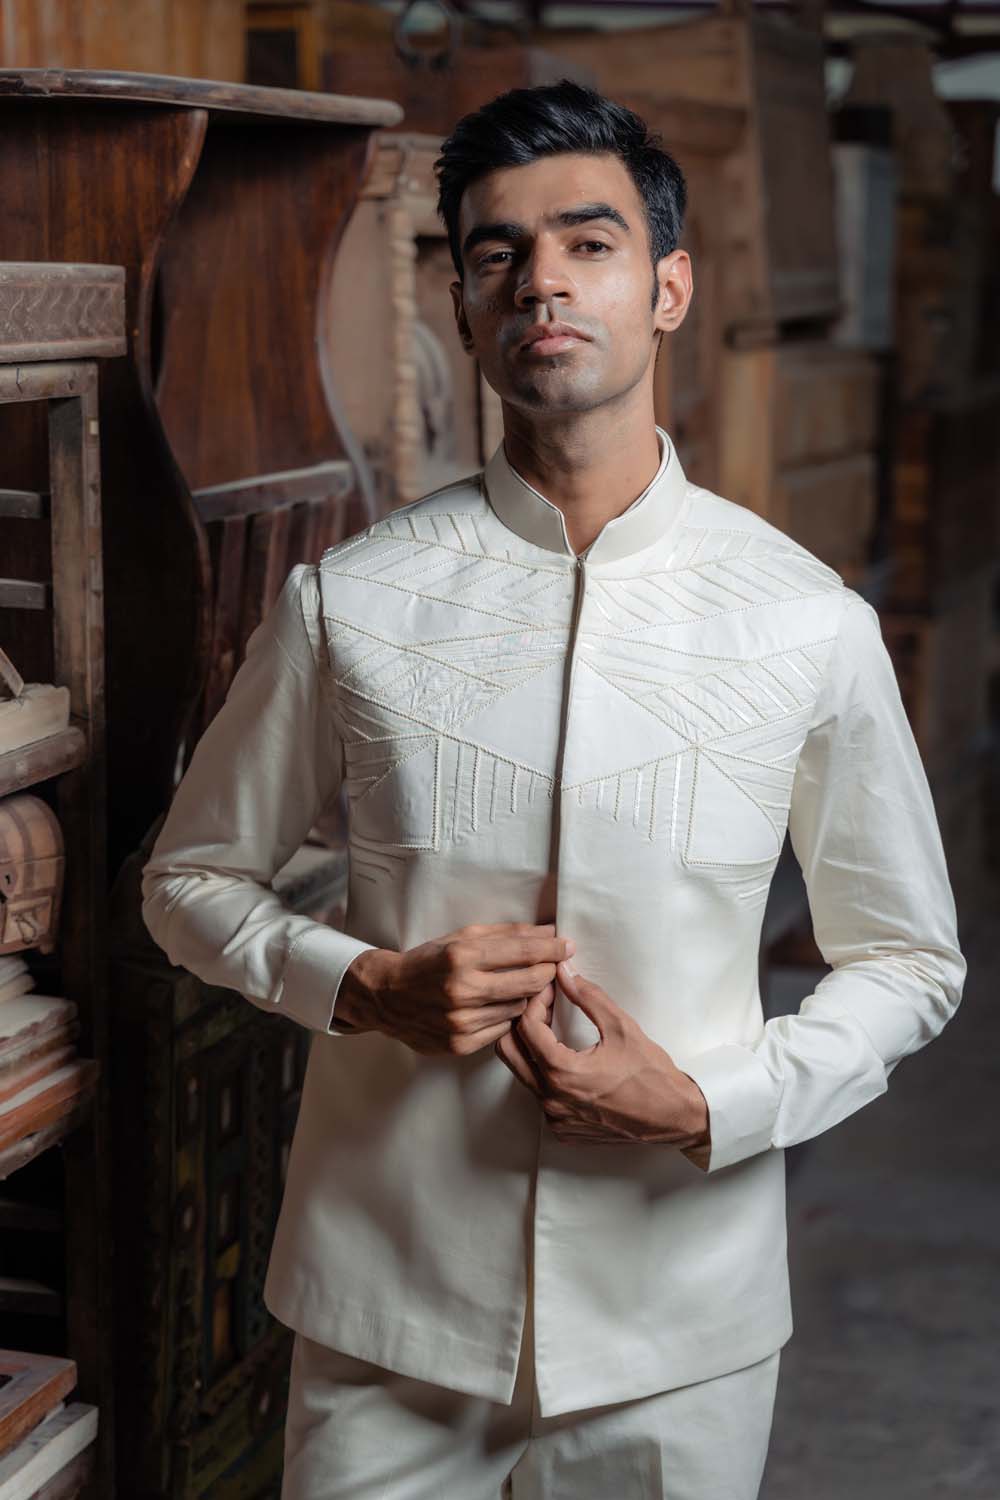 Lagoon Blue Nehru Jacket and Kurta Set in Silk with Embroidery -...